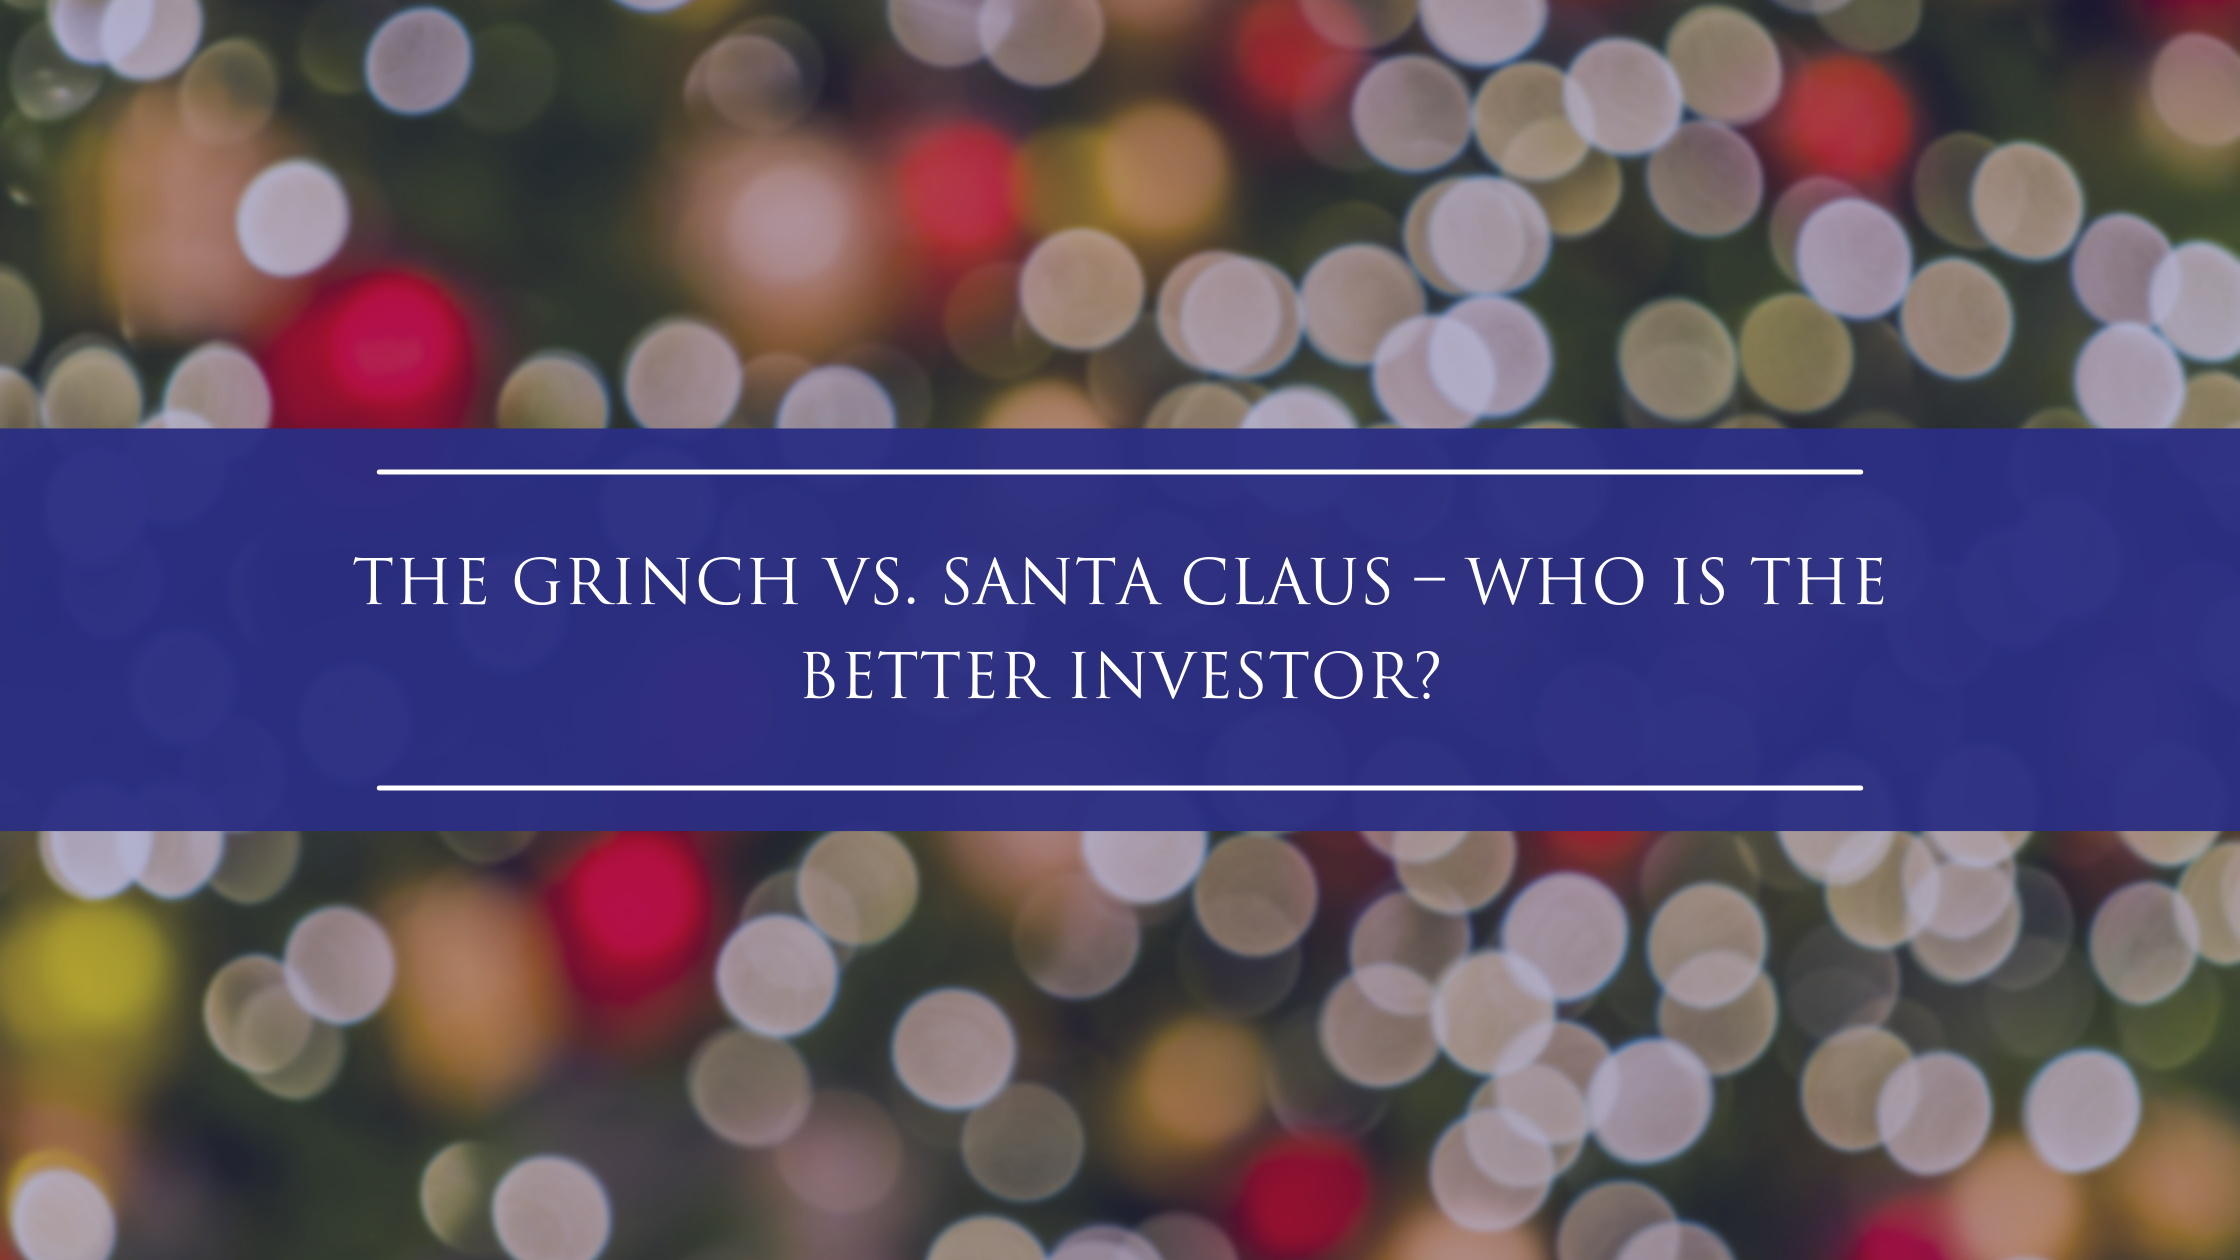 The Grinch vs. Santa Claus – Who is the better investor?